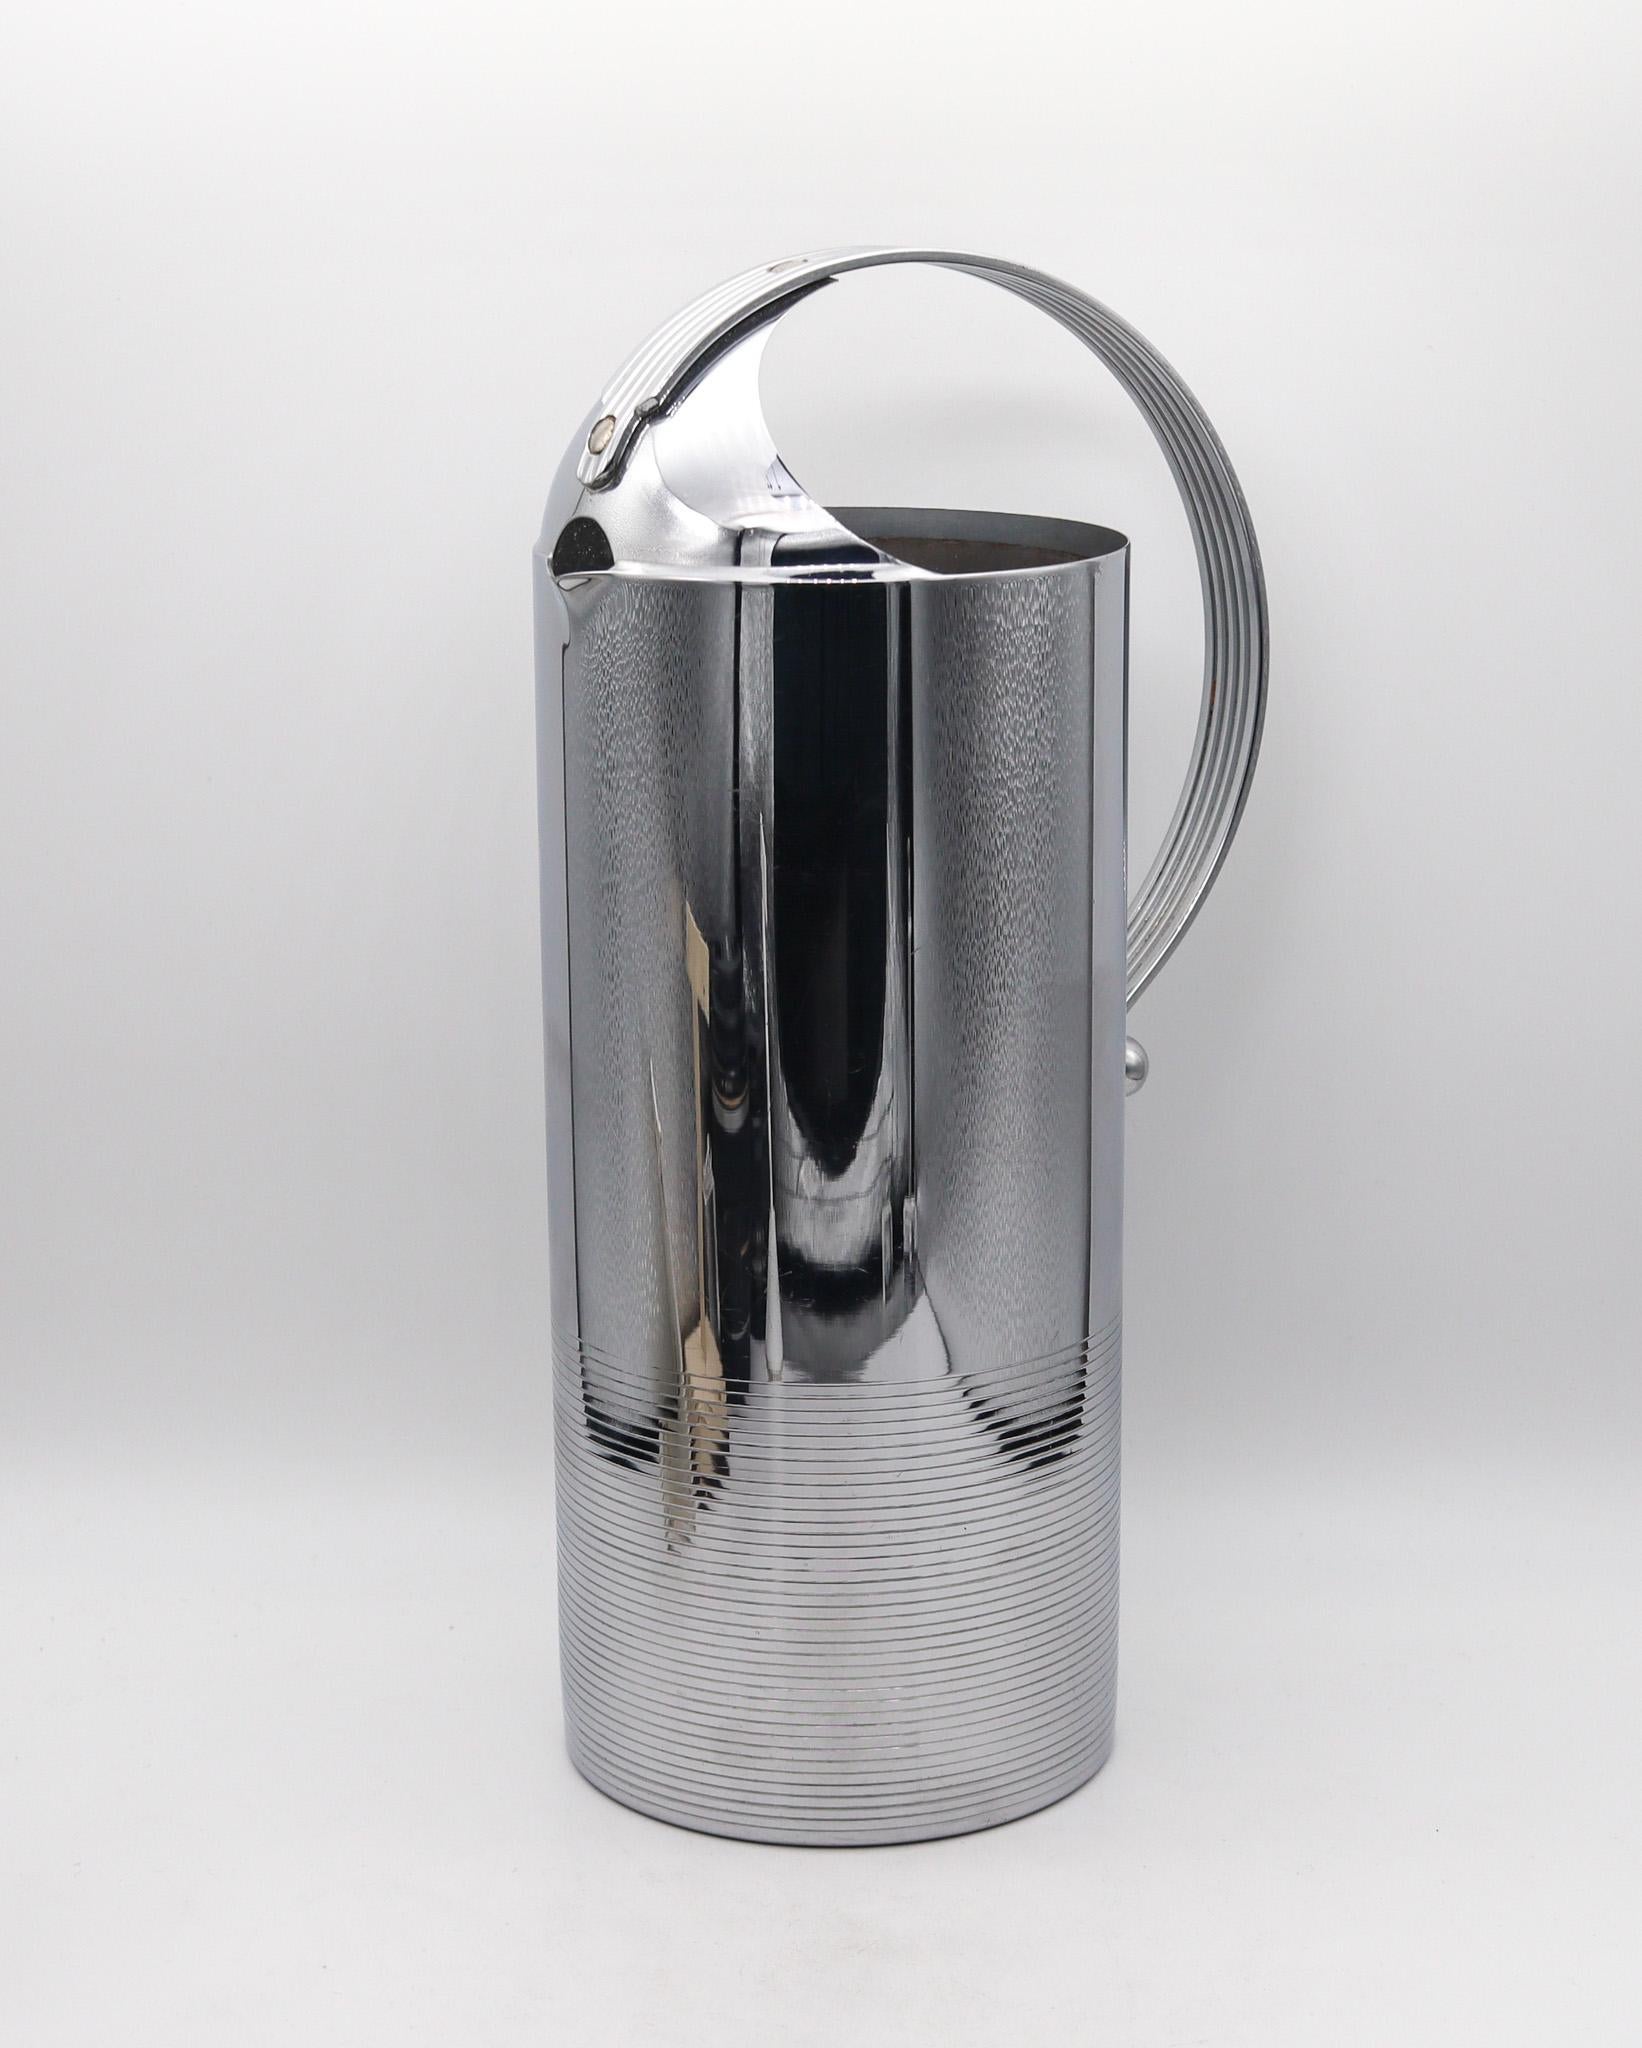 An art deco pitcher designed by Norman Bel Geddes for Manning Bowman.

A fabulous art deco machine-age pitcher, created in America by the Manning Bowman Company, back in the late 1930. This design of this original and avant garde piece was conceived